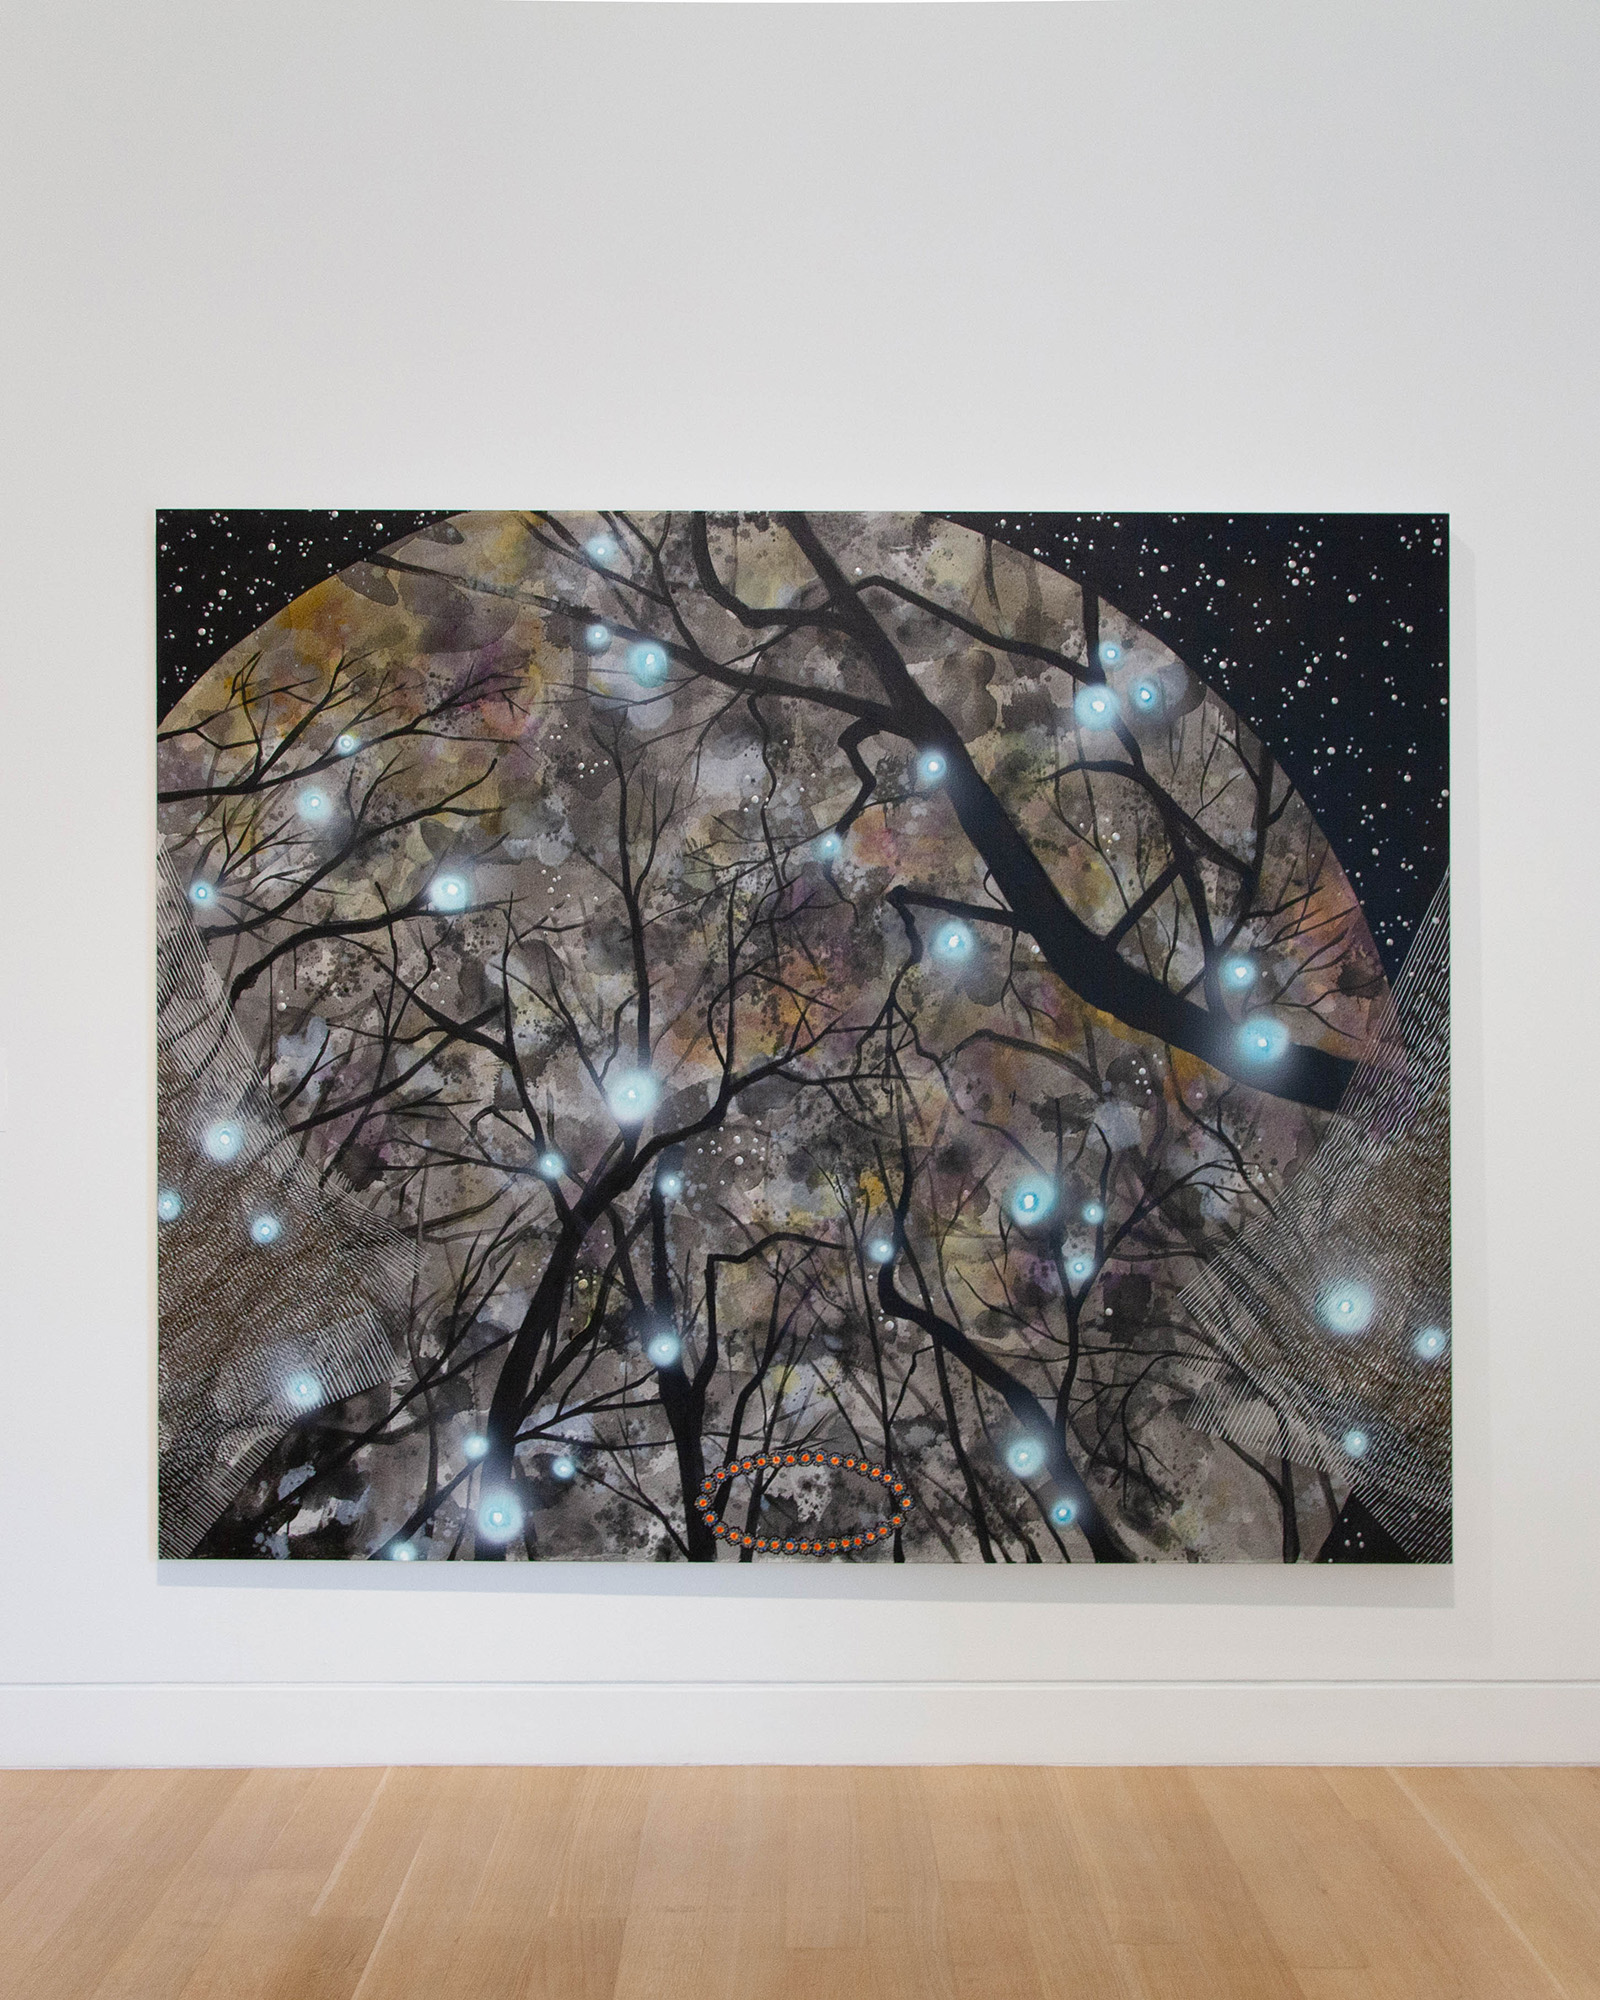 Michiko Itatani, Brown Dwarf, from Cosmic Encounter 17-B-2, 2017. Courtesy of the artist. Installation view in New Age, New Age: Strategies for Survival at DePaul Art Museum, 2019. Photo: DePaul Art Museum